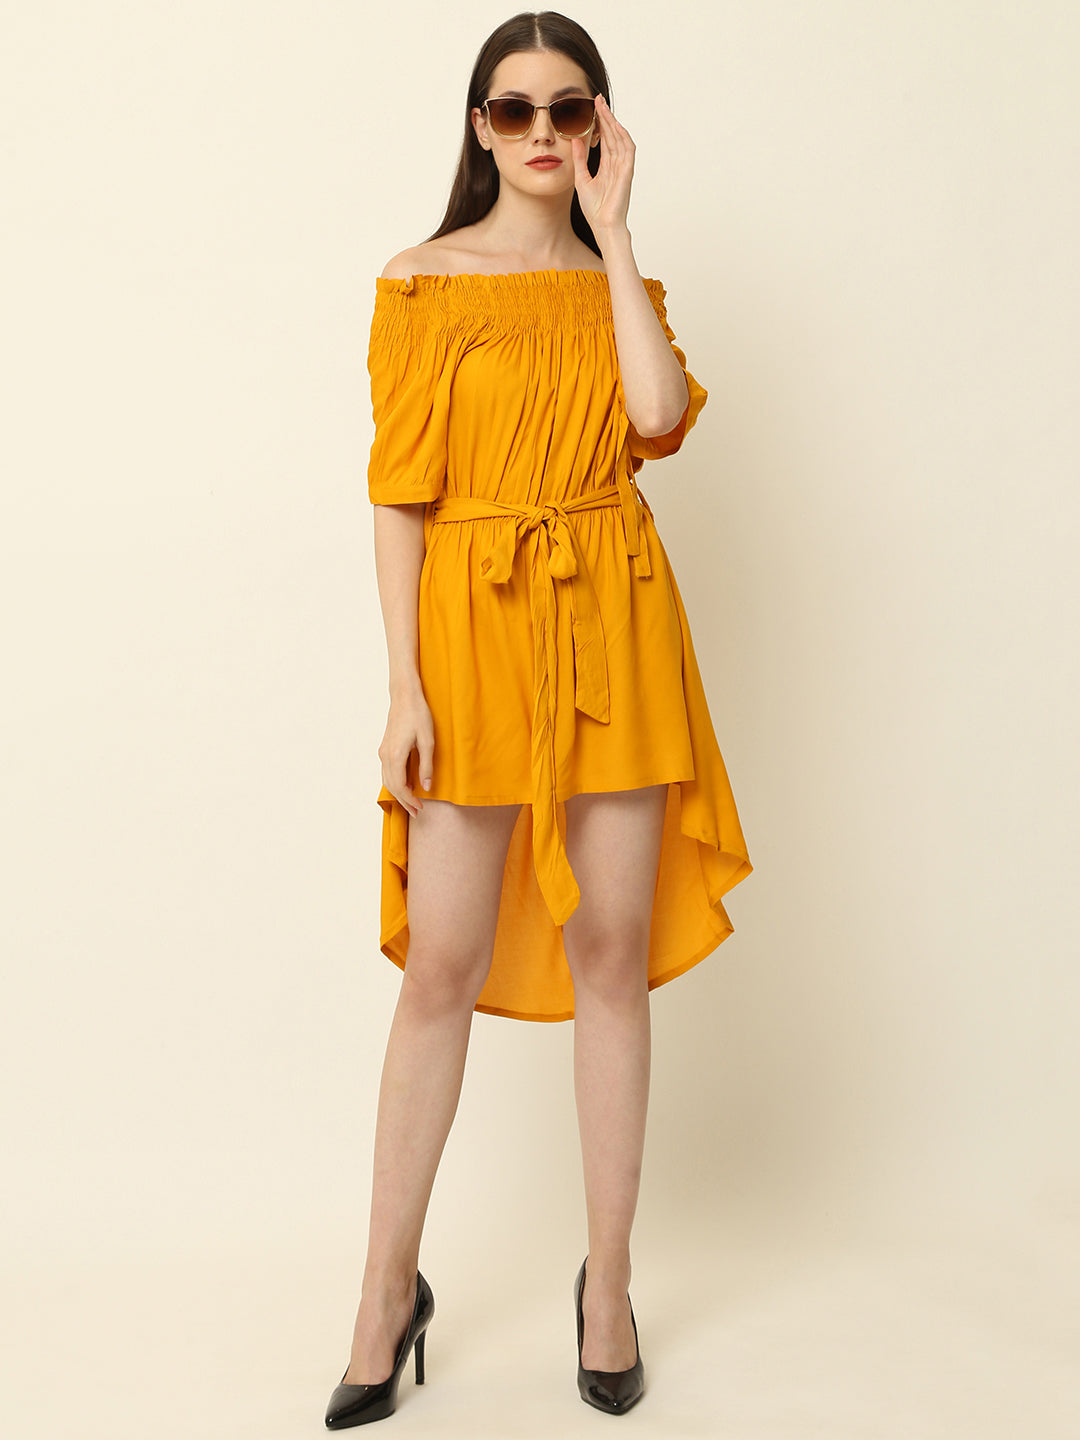 Mustard Yellow Off Shoulder High Low One Piece Dress